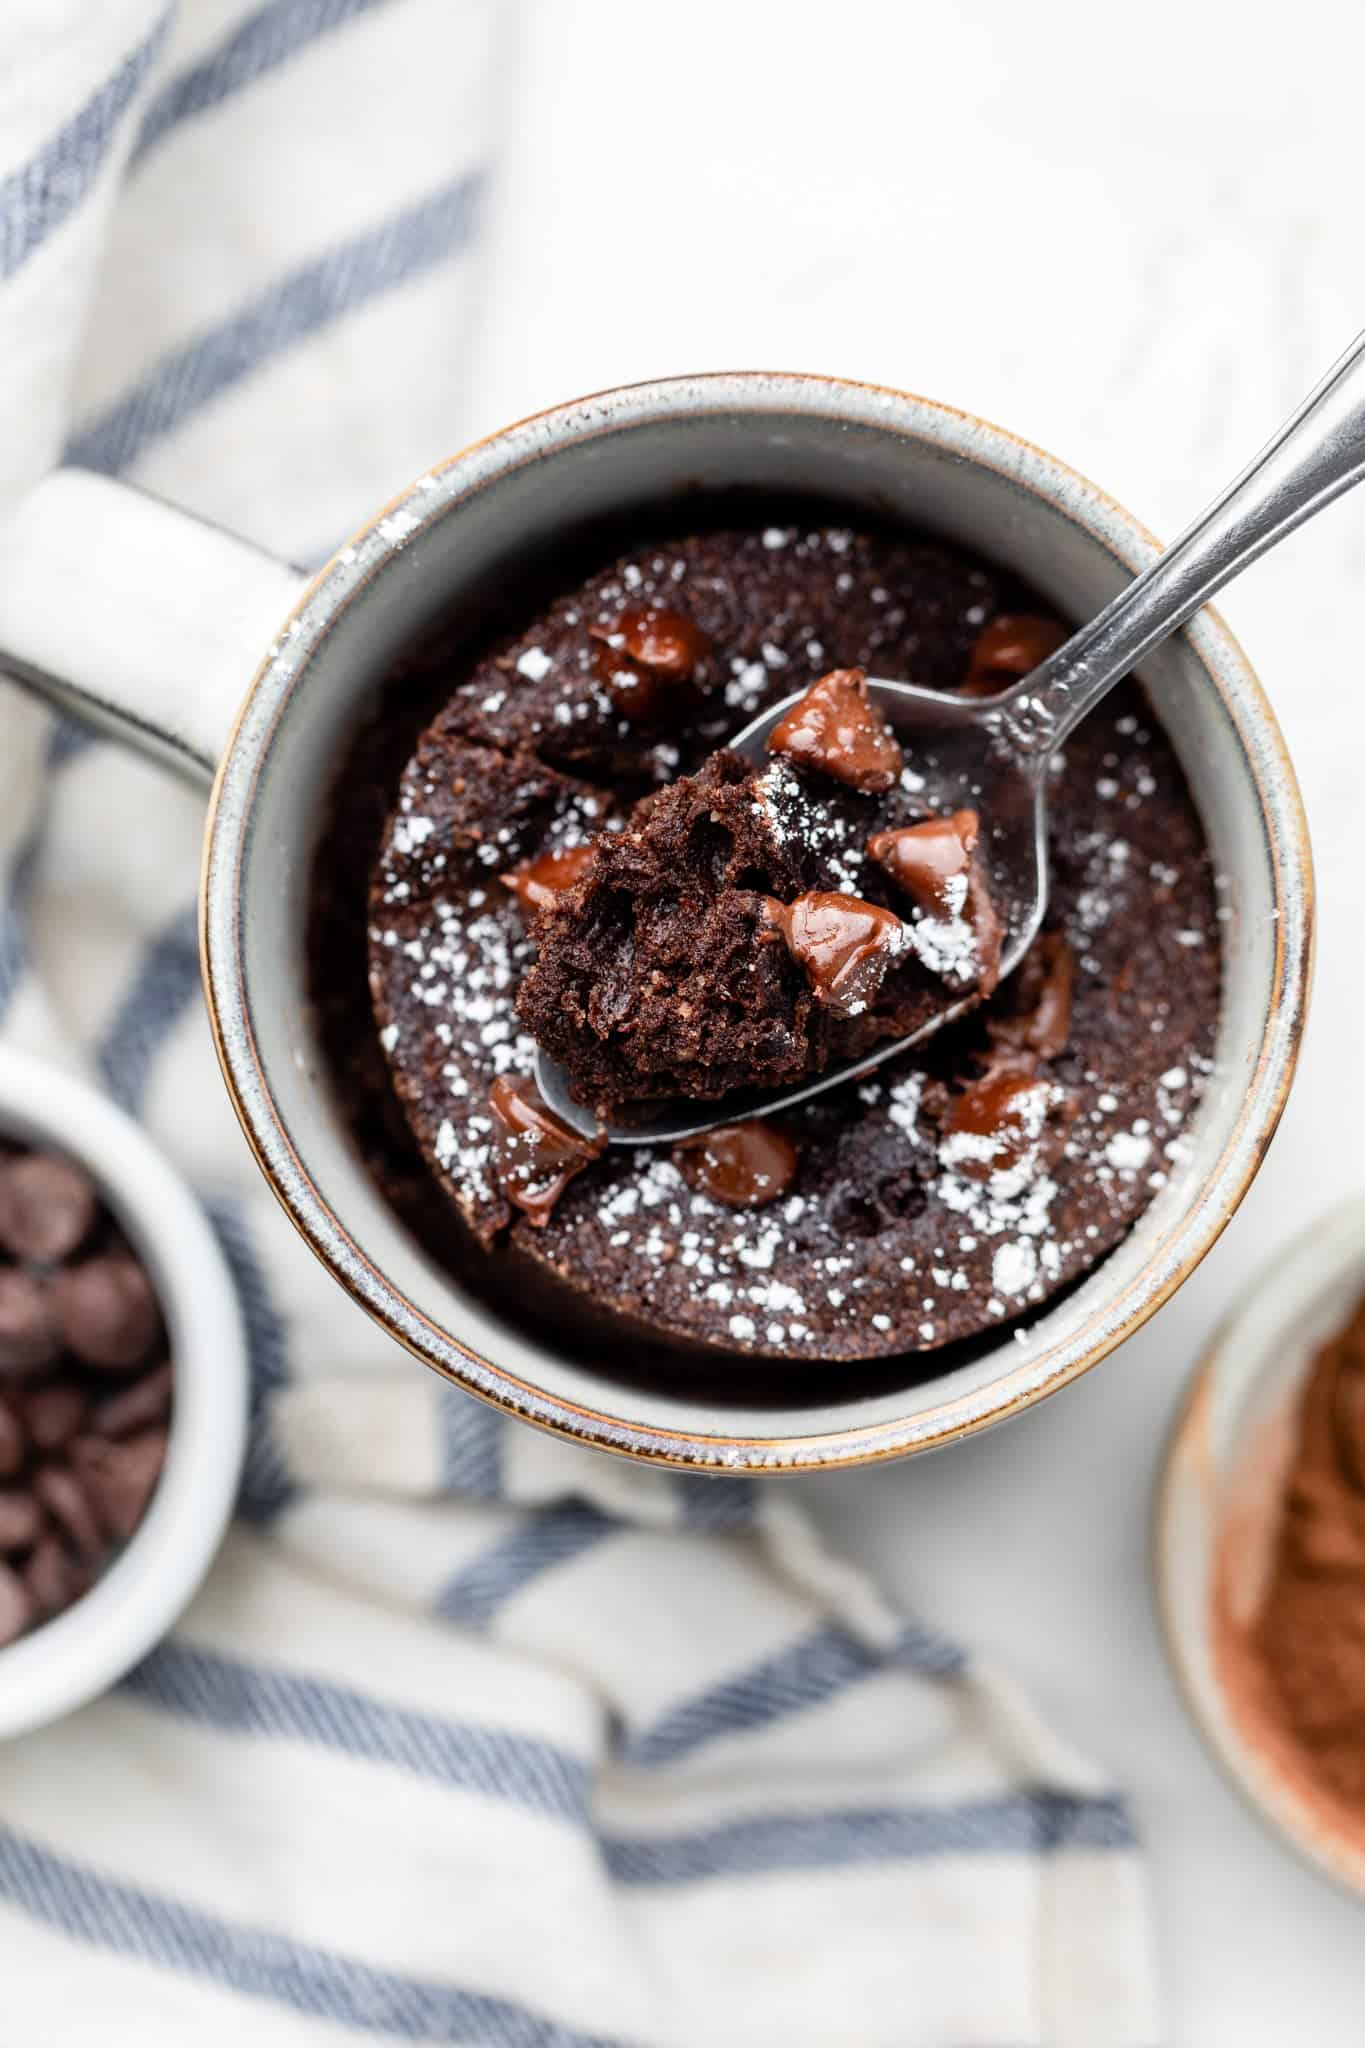 The healthy mug cake recipe cooking in a mug with a big spoonful taken out.